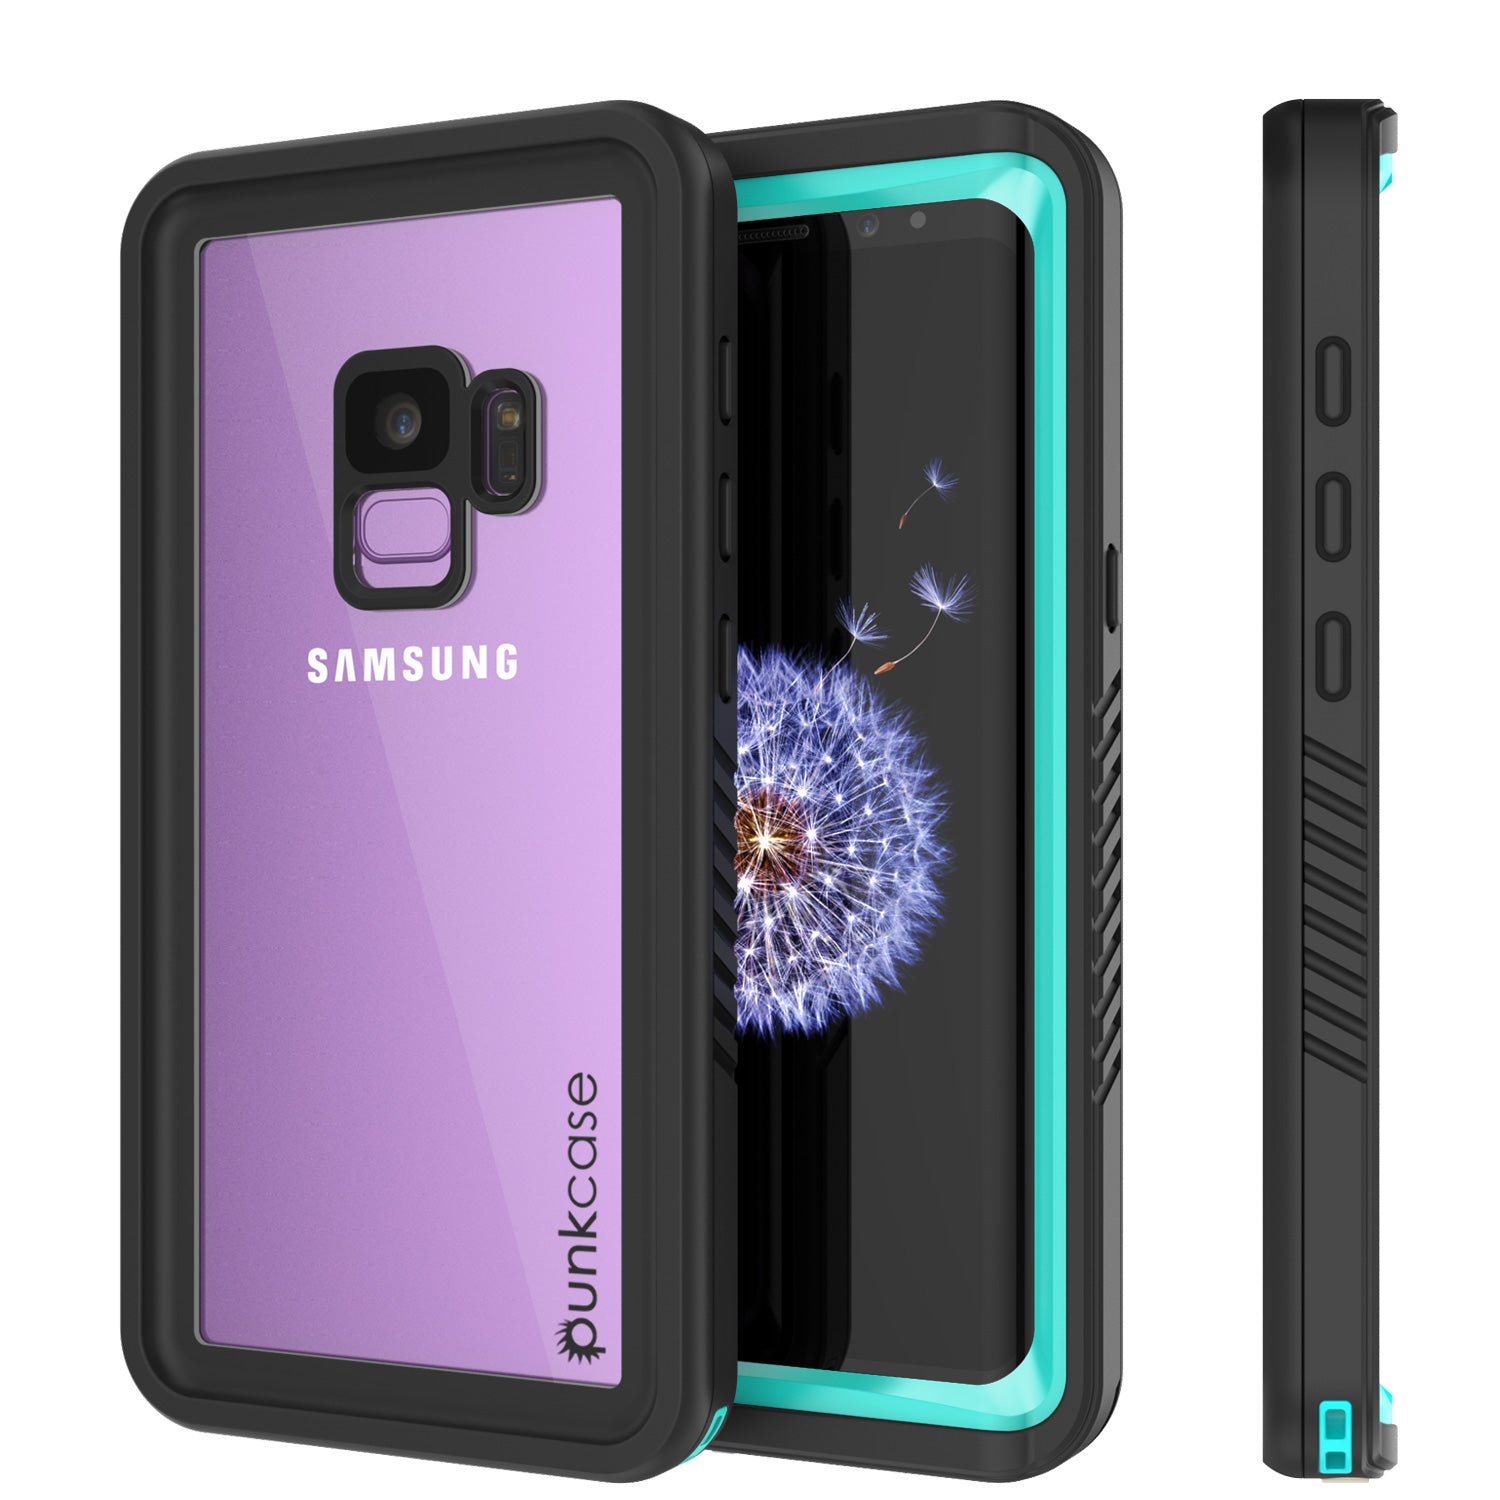 Galaxy S9 PLUS Waterproof Case, Punkcase [Extreme Series] [Slim Fit] [IP68 Certified] [Shockproof] [Snowproof] [Dirproof] Armor Cover W/ Built In Screen Protector for Samsung Galaxy S9+ [Teal]